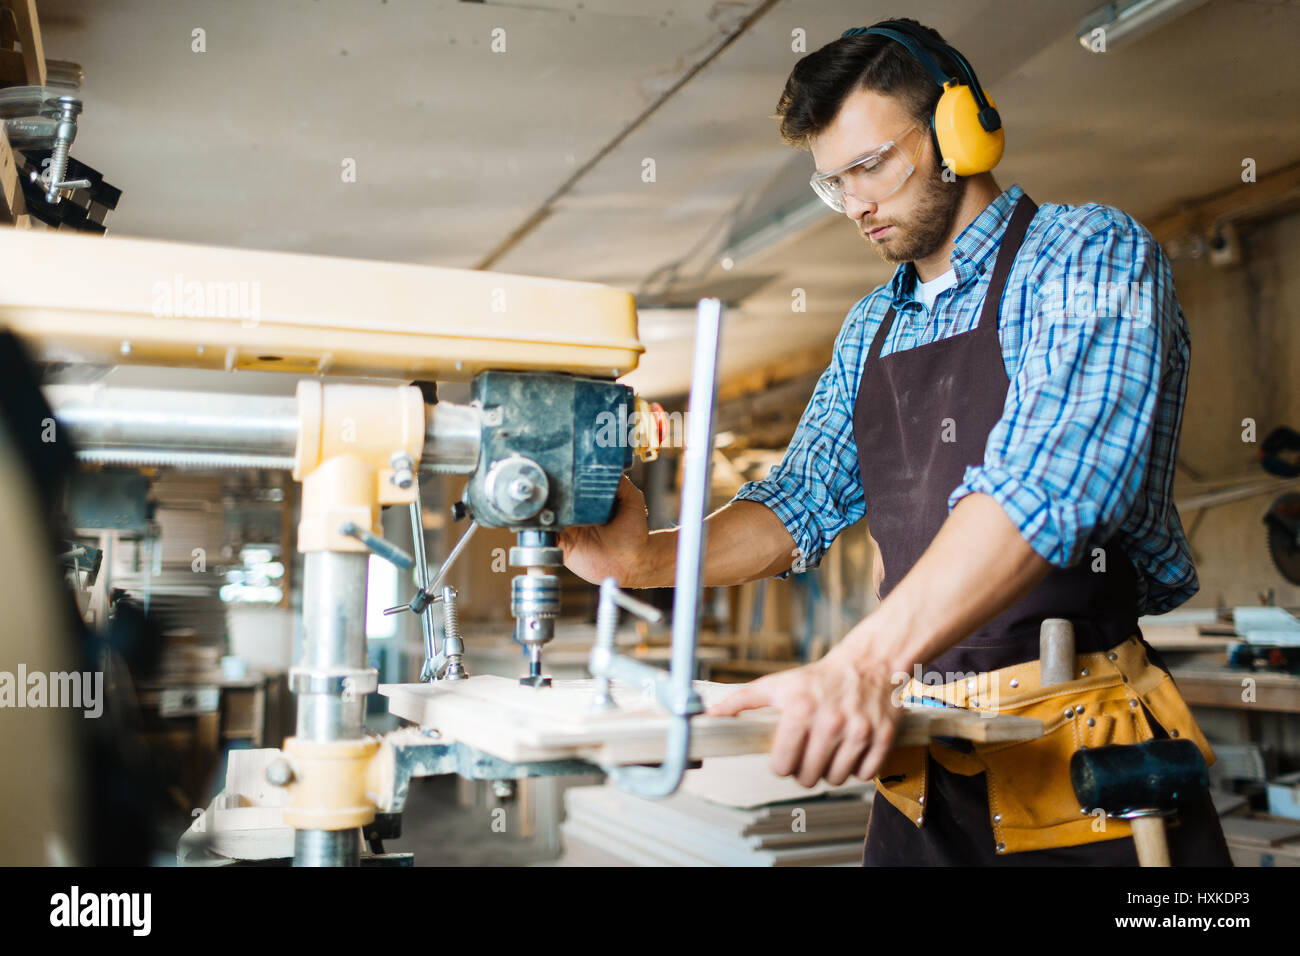 Using drill press in workshop Stock Photo